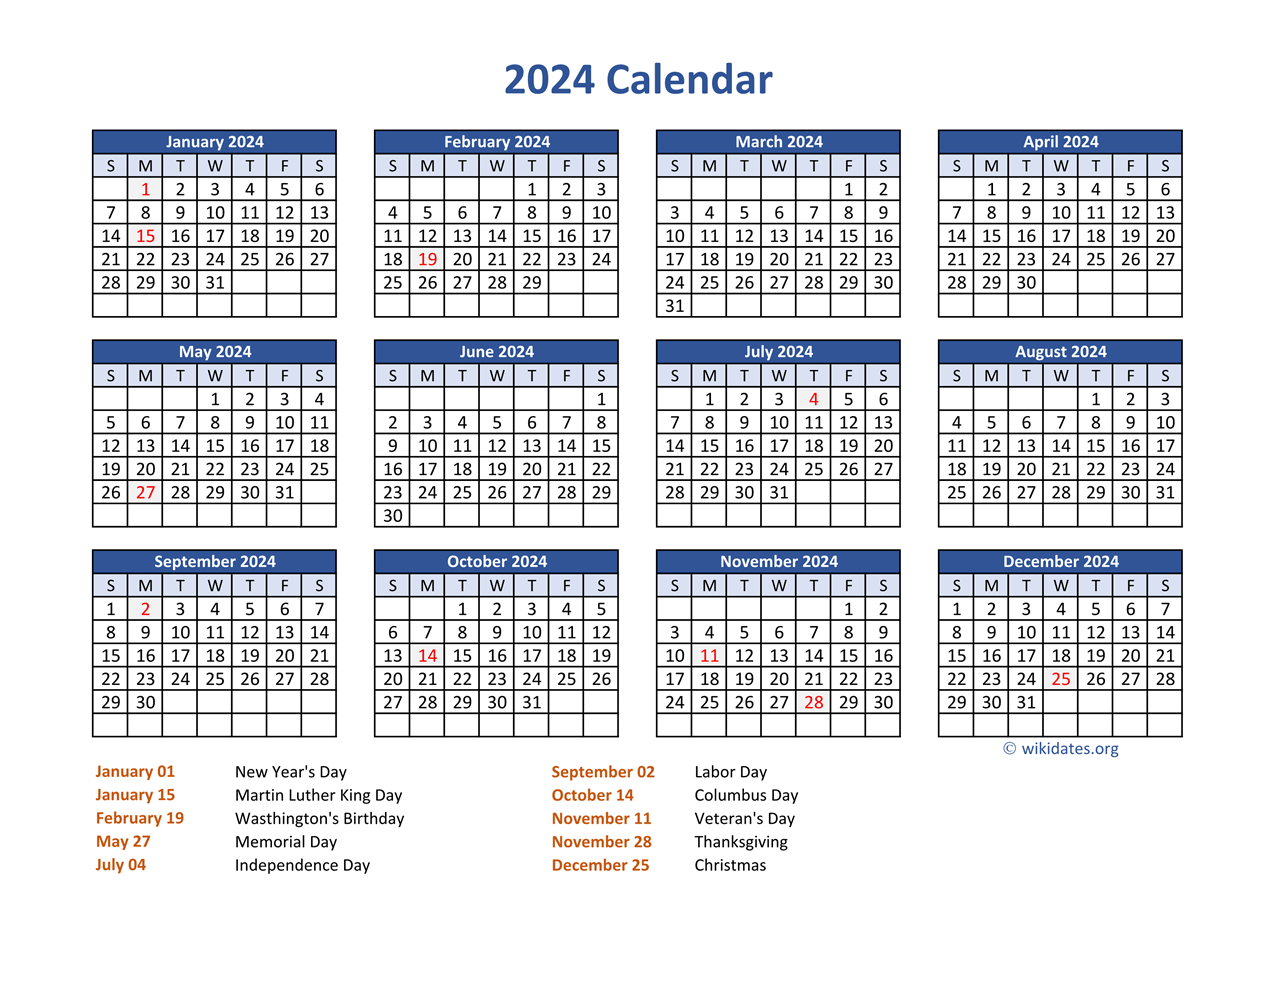 Pdf Calendar 2024 With Federal Holidays | Wikidates for Free 2024 Calendar With Holidays Printable